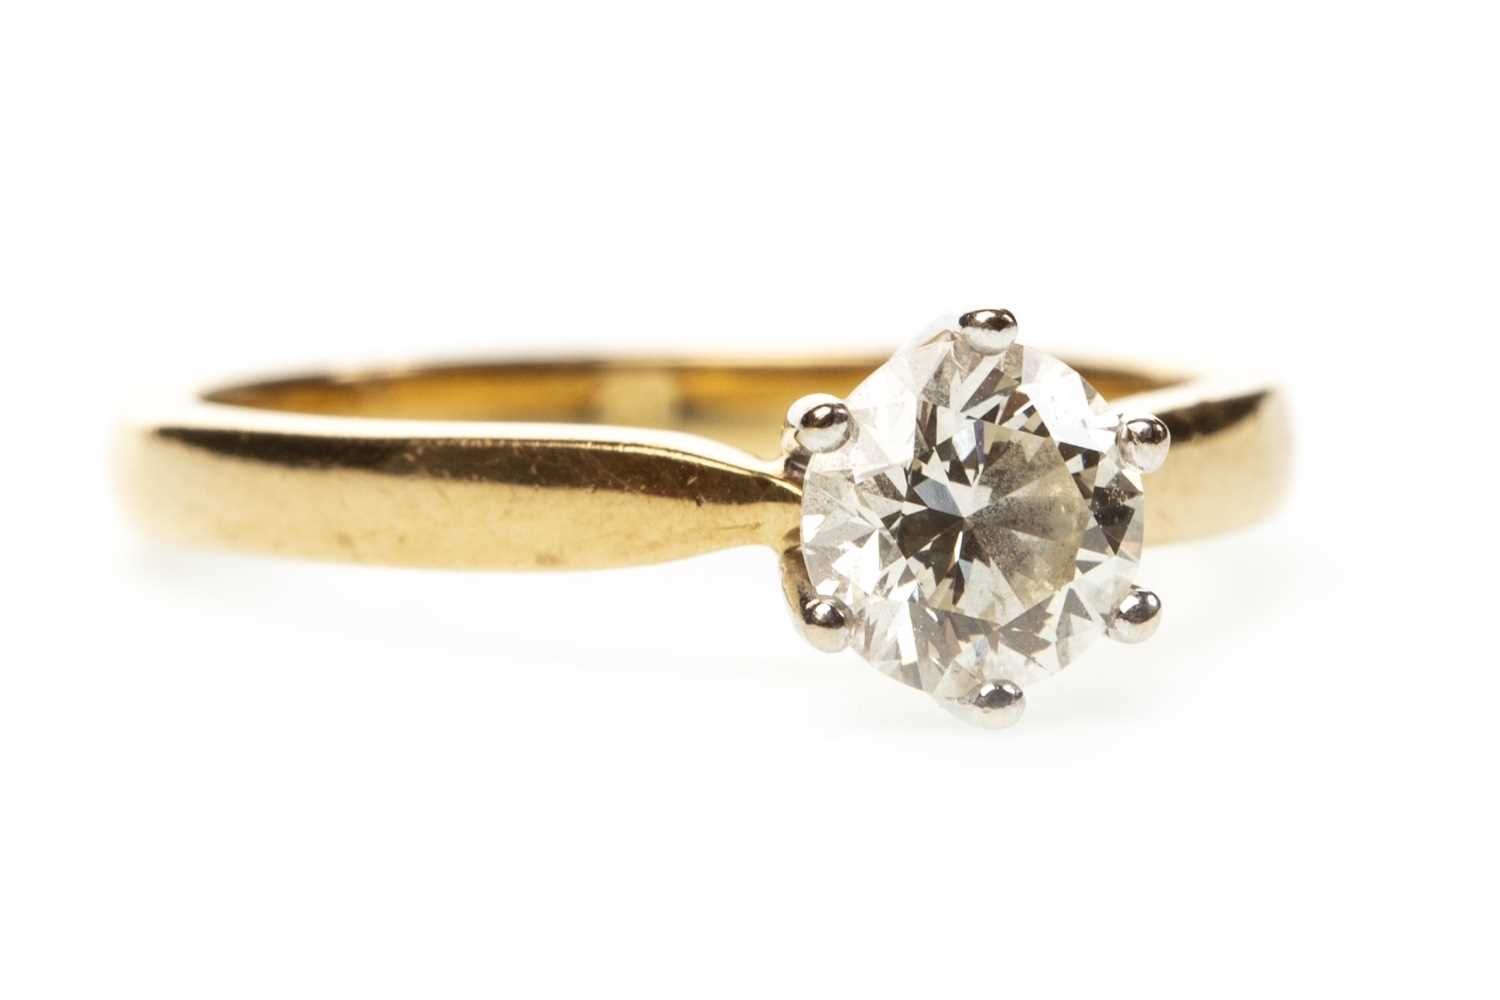 Lot 161 - A DIAMOND SOLITAIRE RING